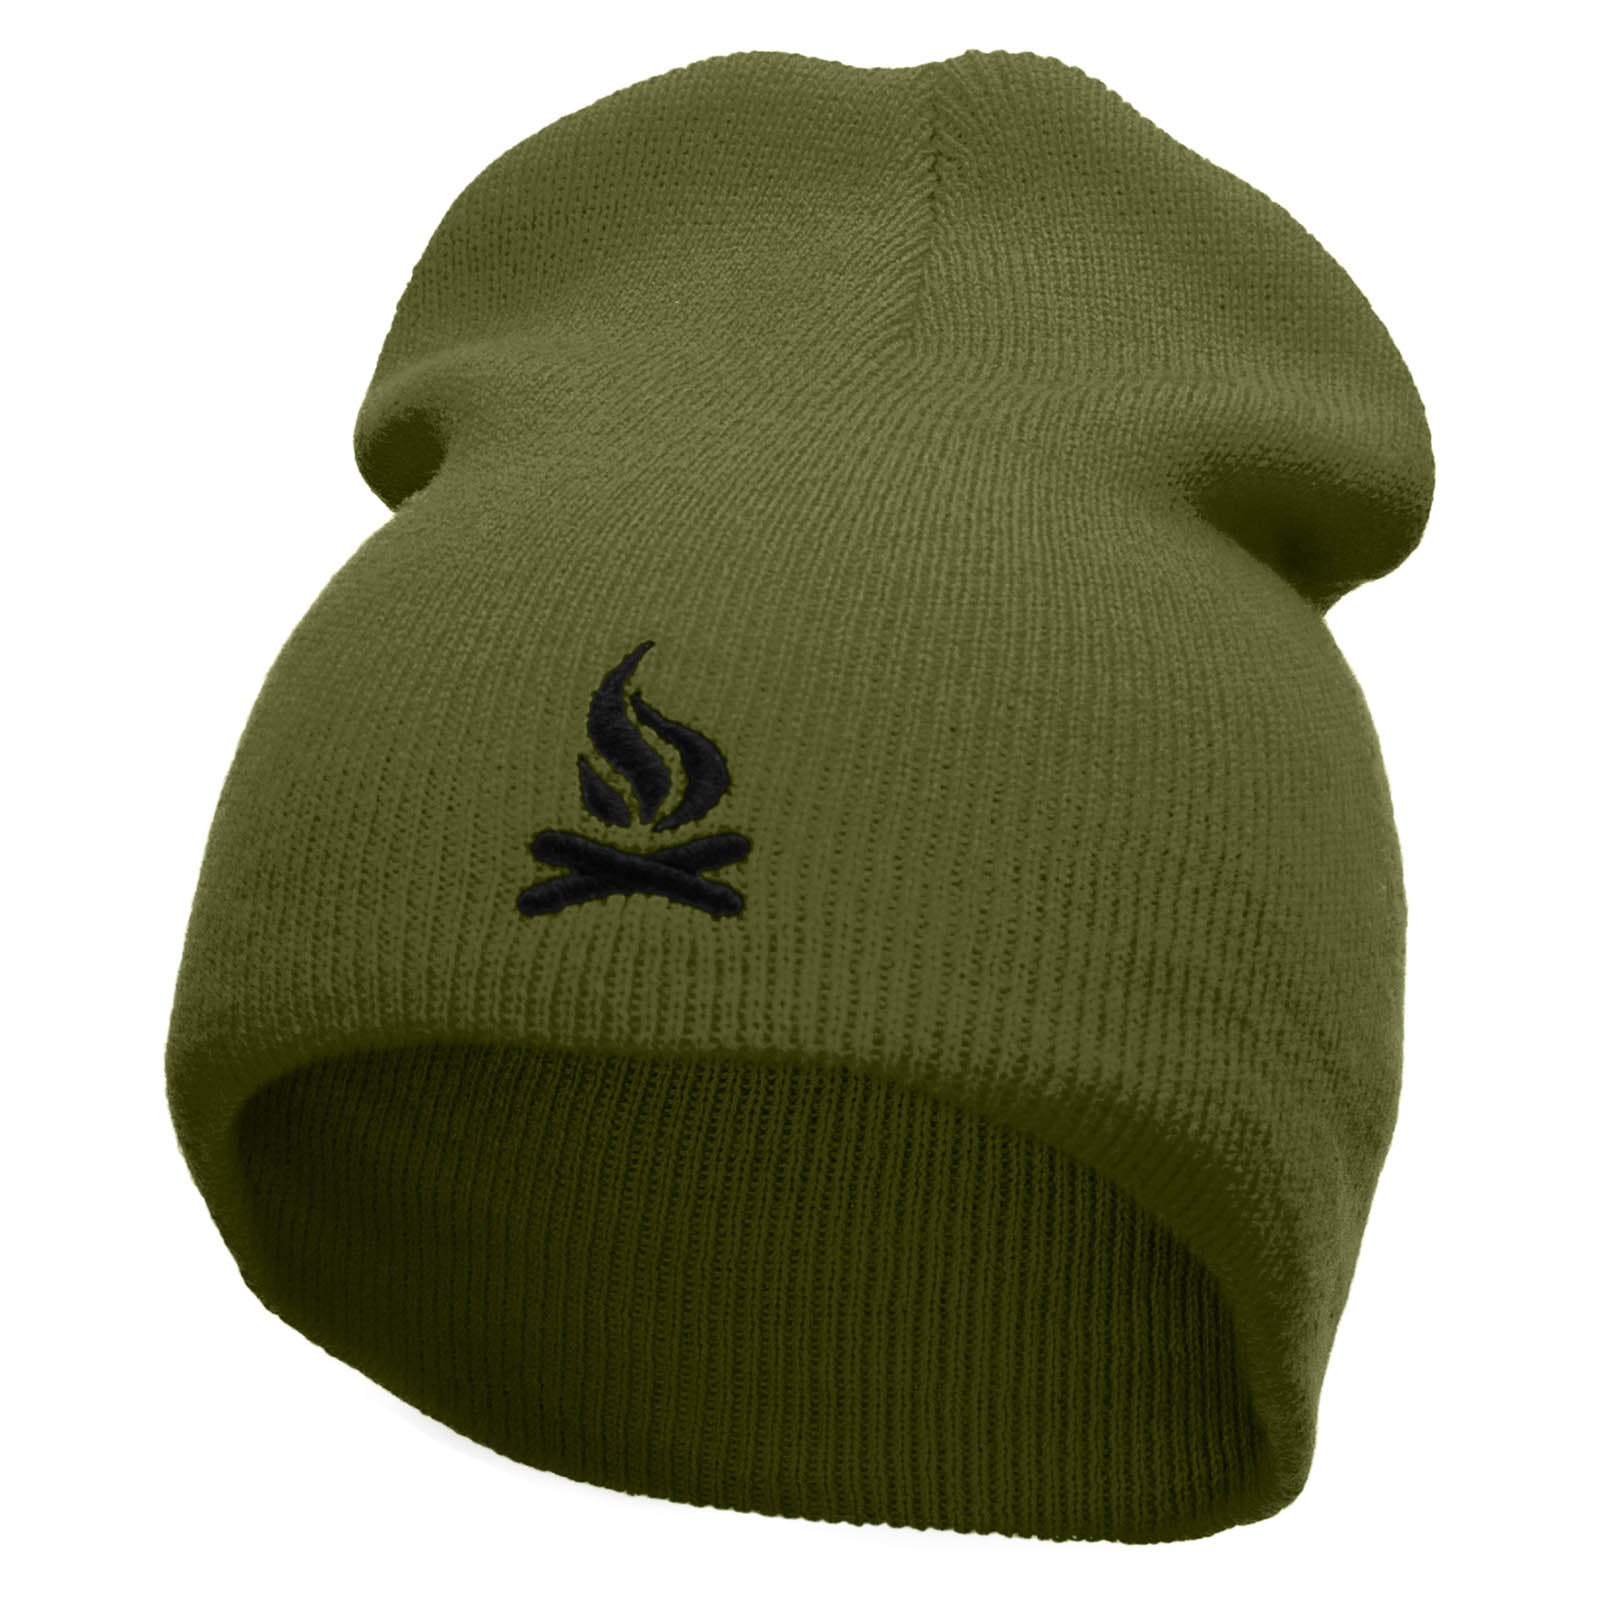 Camp Fire Embroidered 8 Inch Short Beanie Made in USA - Military Green OSFM